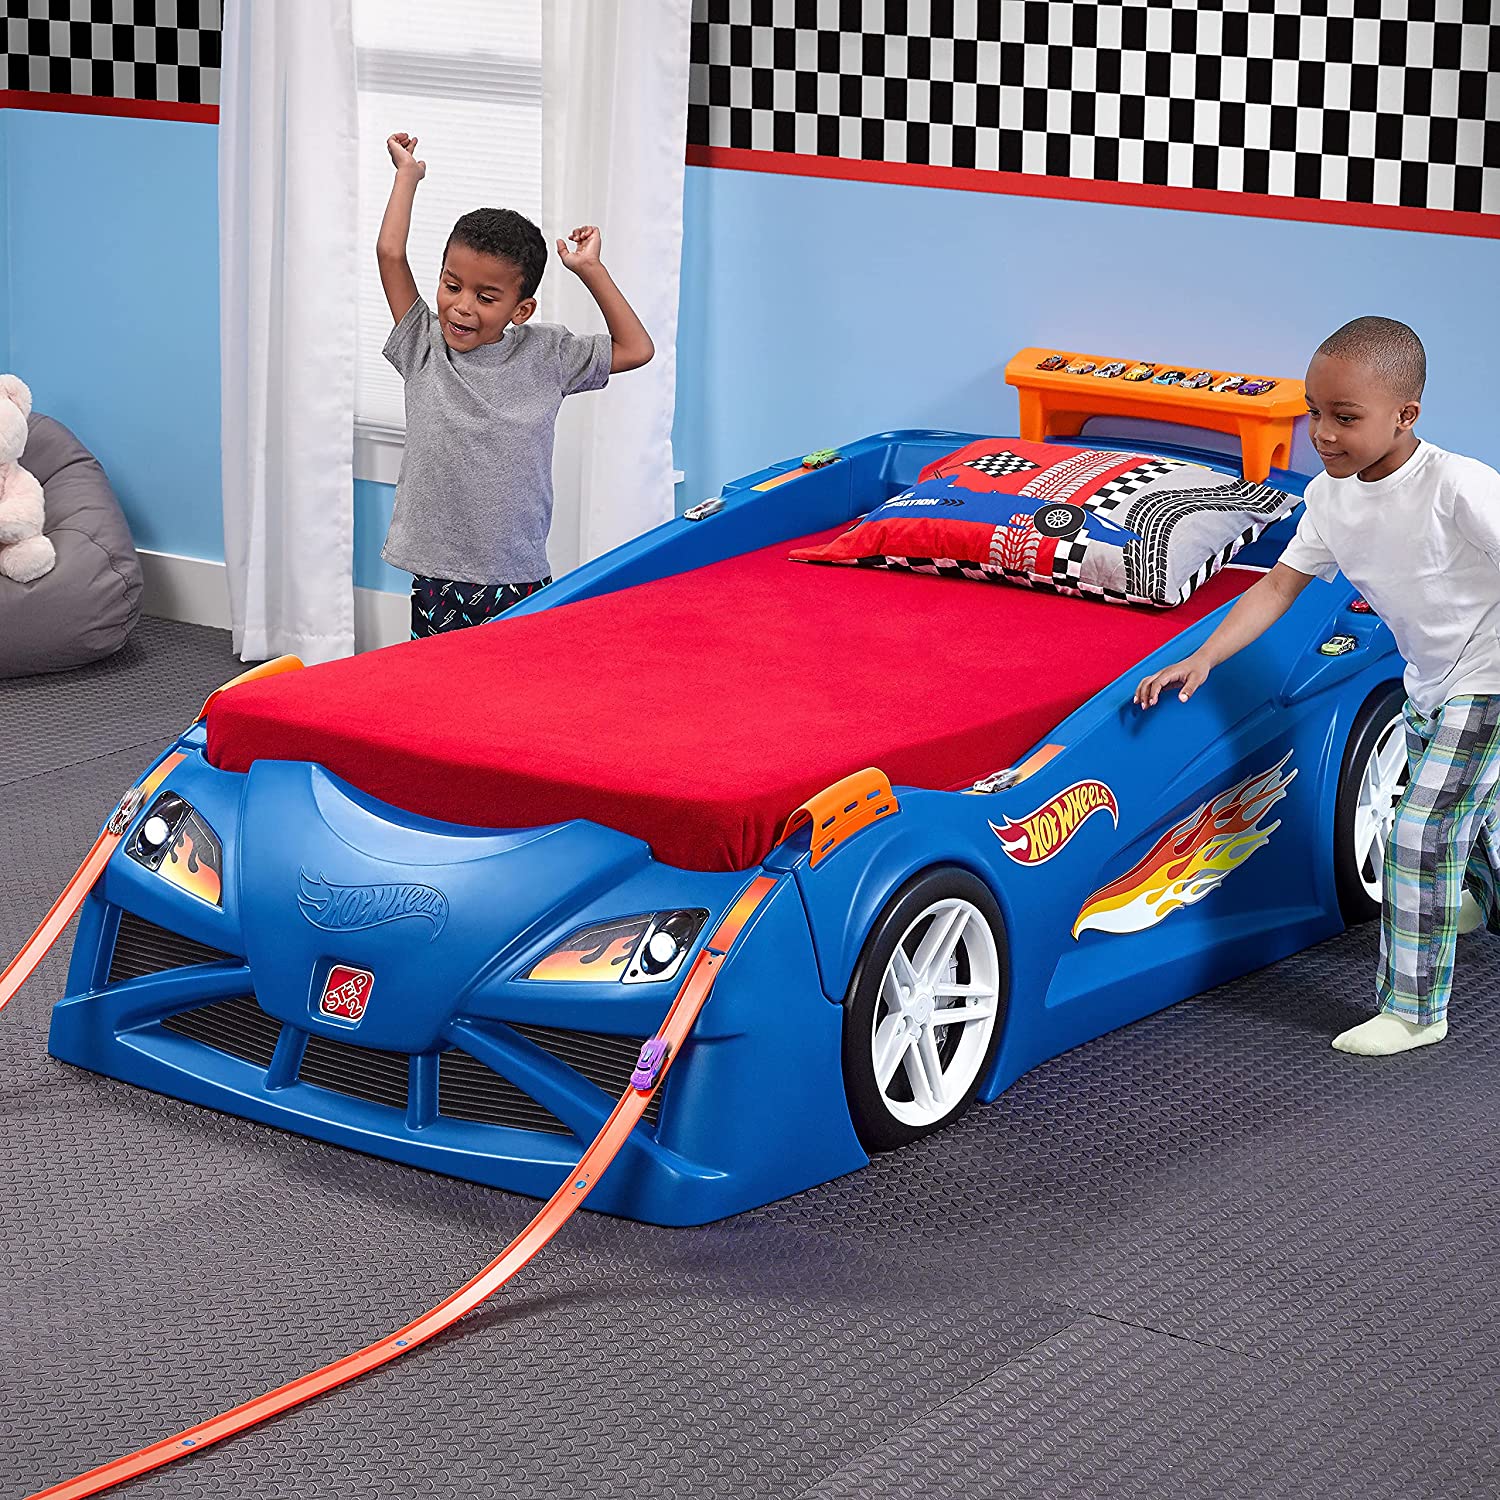 Step2 733538854691 Hot Wheels Toddler to Twin Bed with Lights Vehicle, Blue, Red, Orange